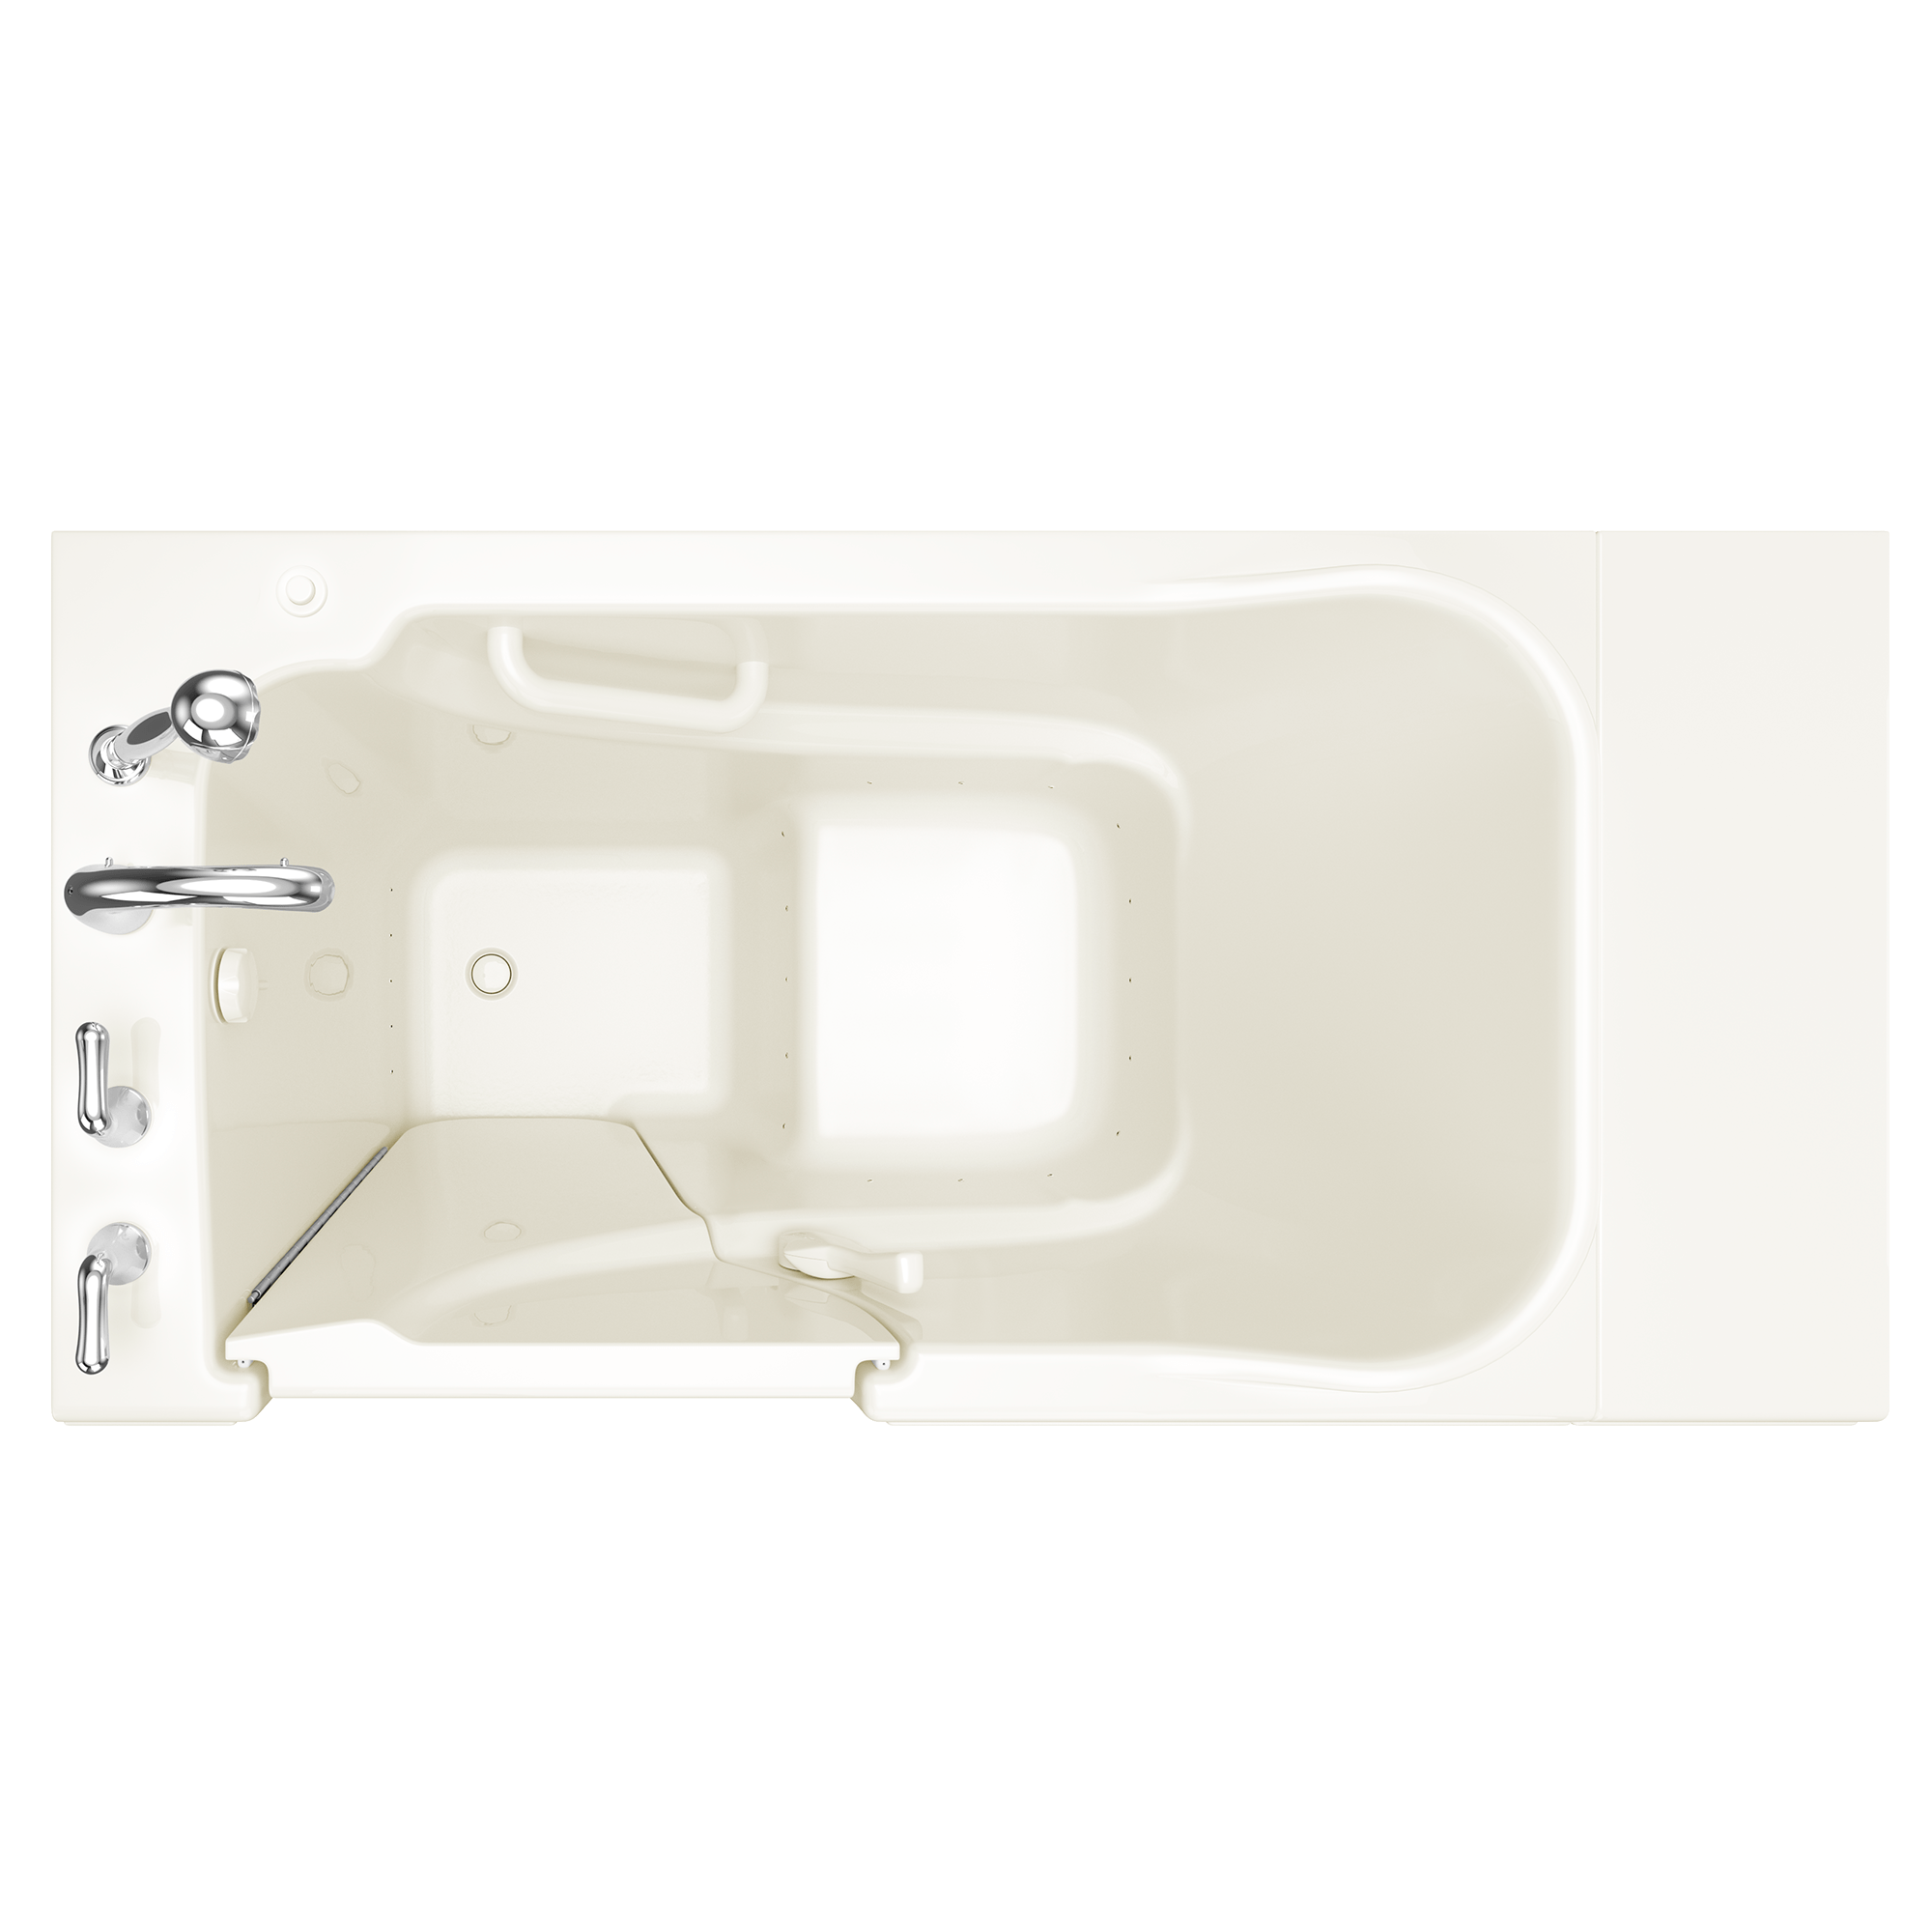 Gelcoat Entry Series 52 x 30-Inch Walk-In Tub With Air Spa System – Left-Hand Drain With Faucet